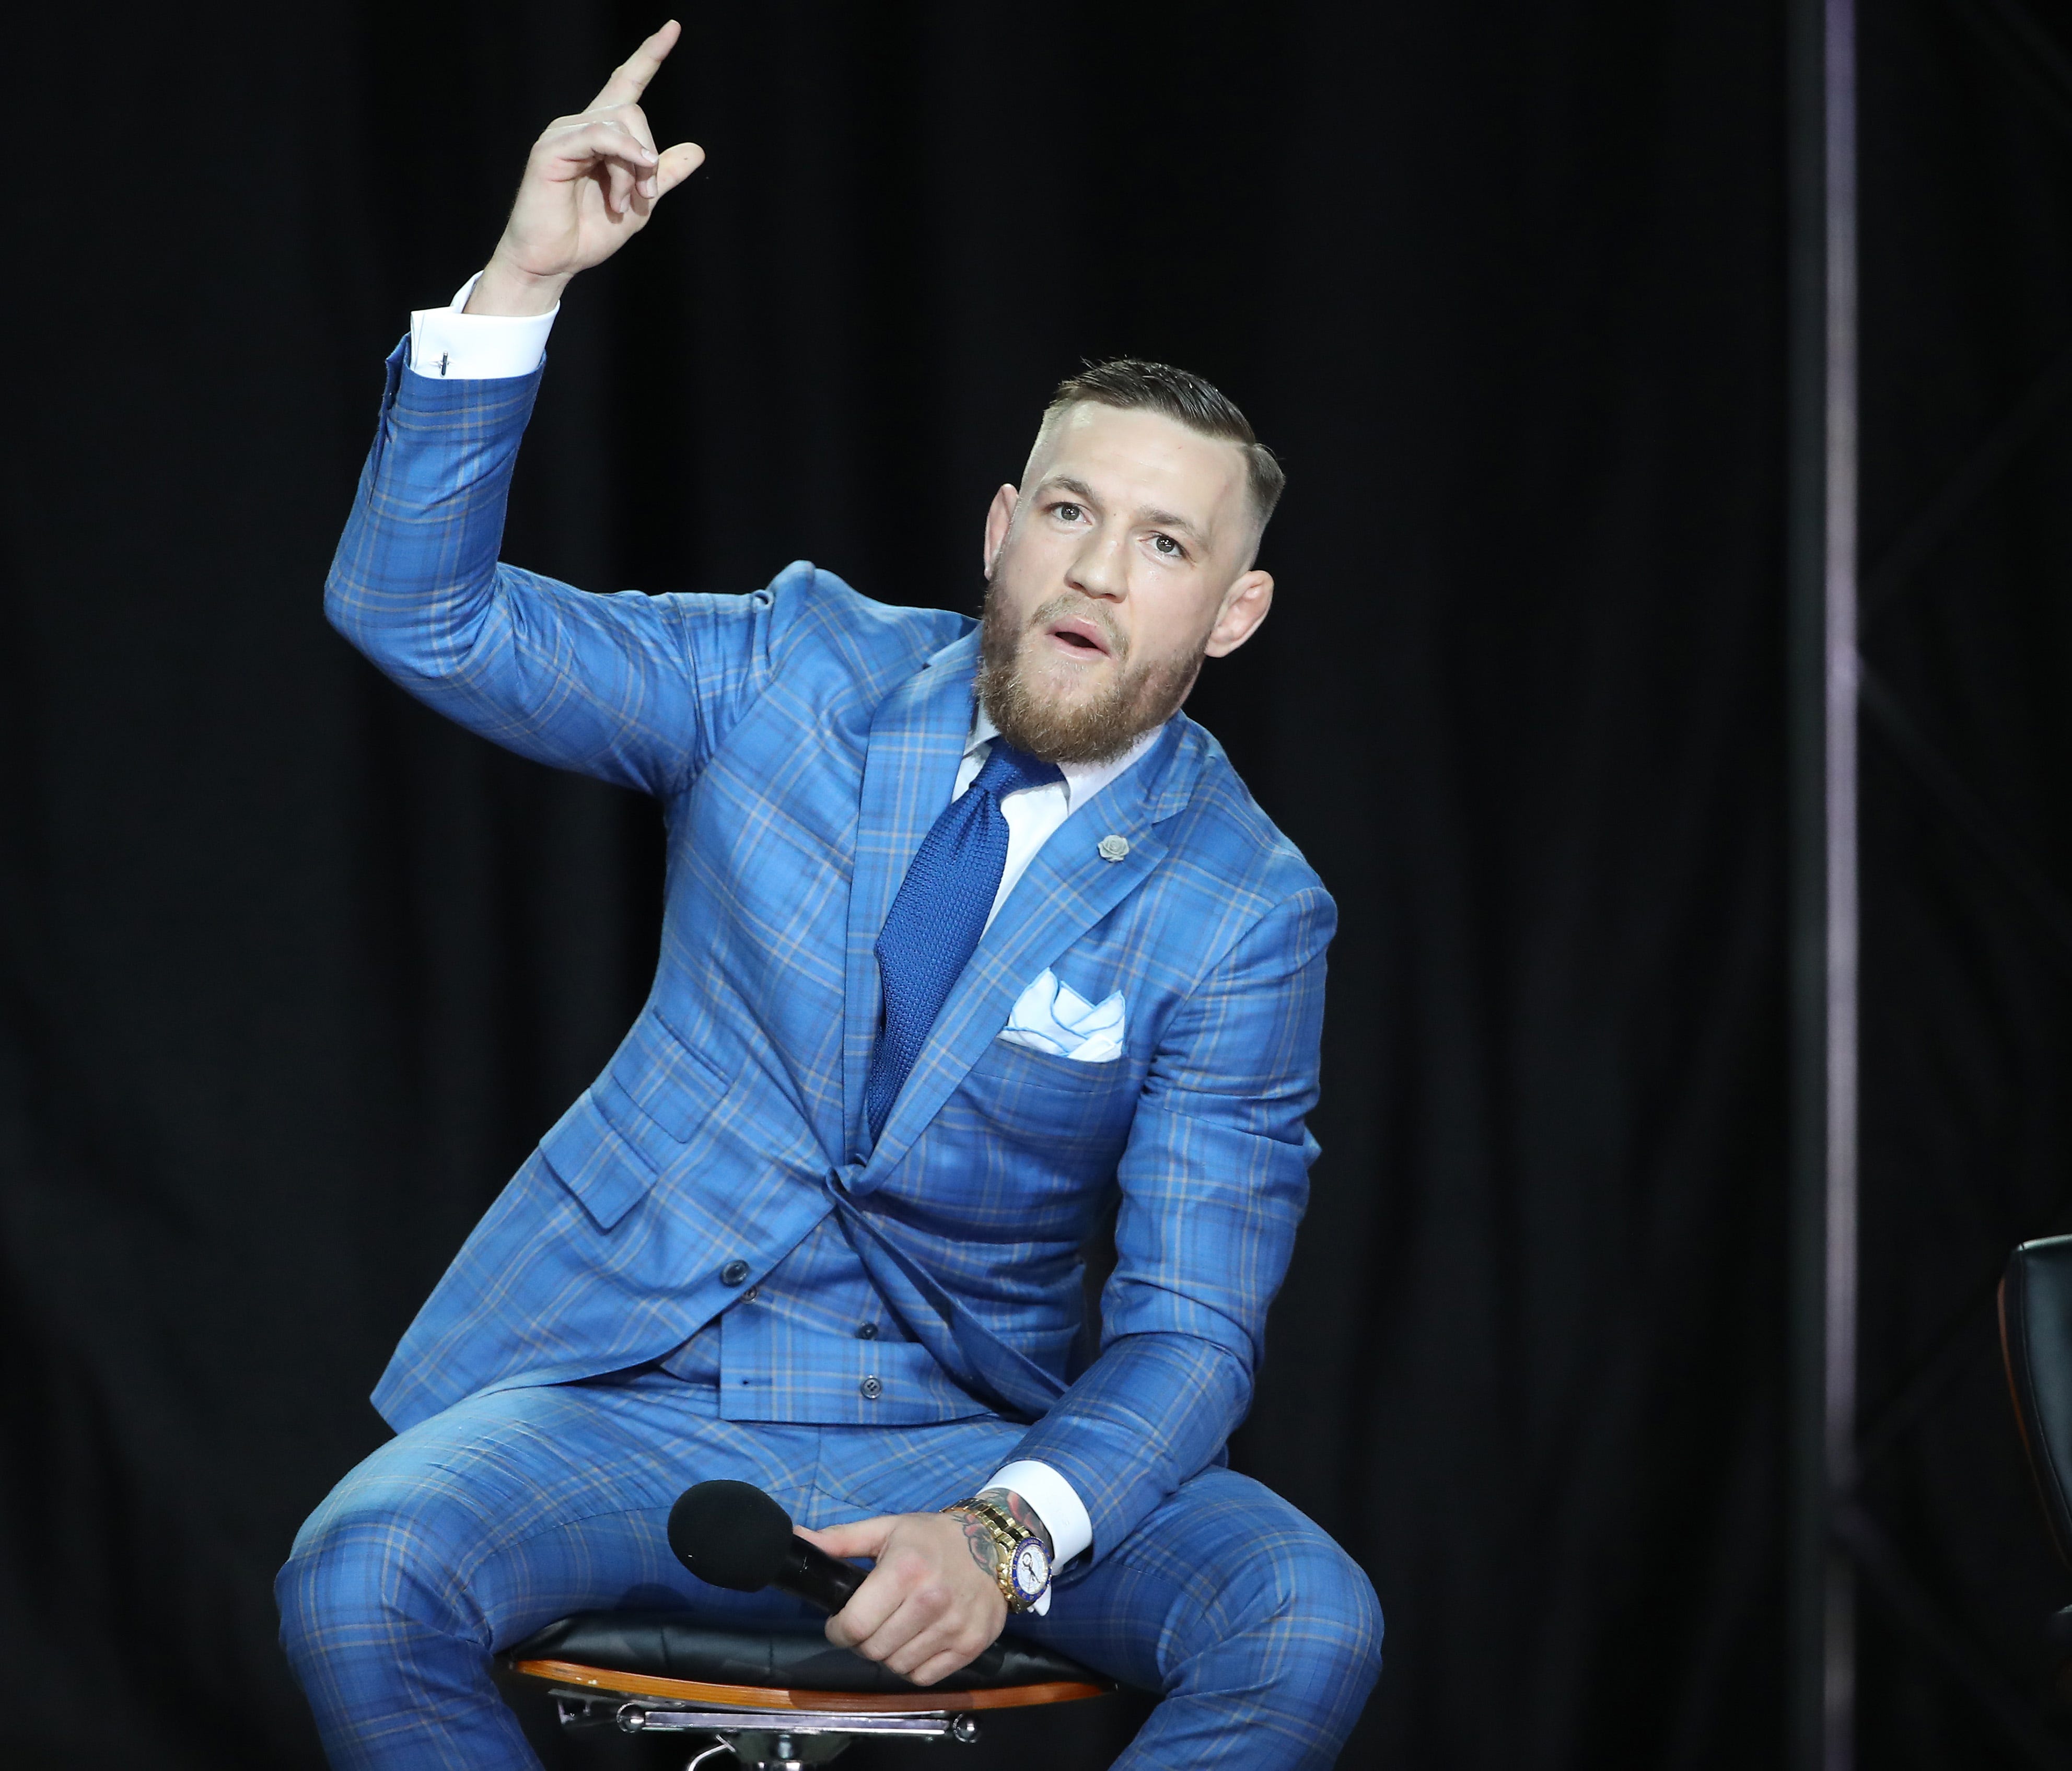 Conor McGregor looks dapper in his designer suit even as he hurls insults at Floyd Mayweather.